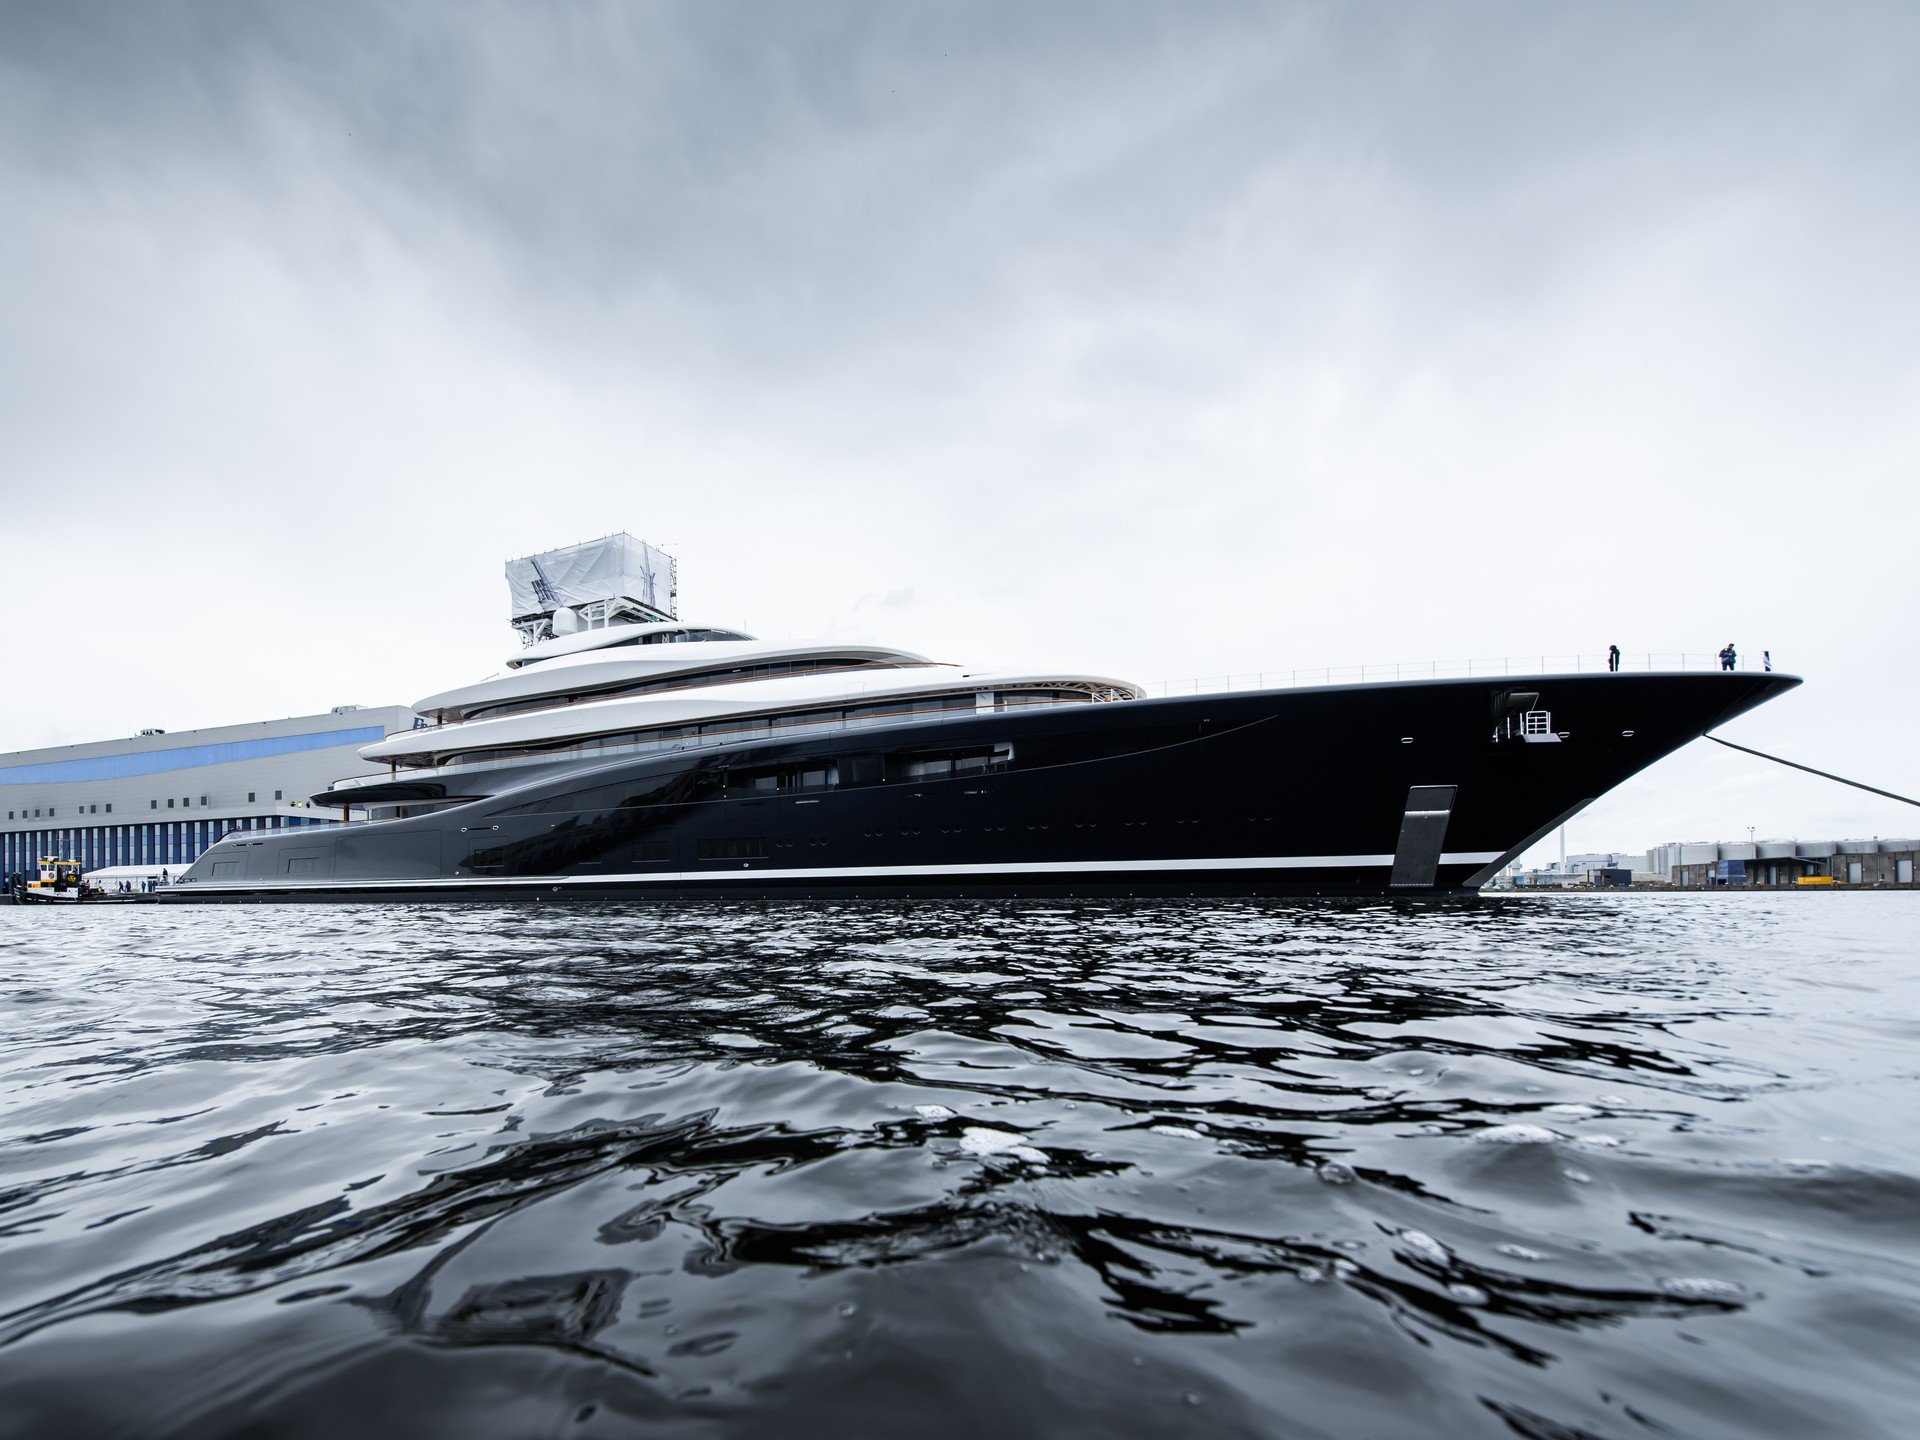 The first superyacht with #hydrogen fuel cells has arrived, and her name is Project 821. Innovative @feadship, a product of five years of hard work. One of the most basic questions that Project 821 seeks to address is, &quot;How far can we push green